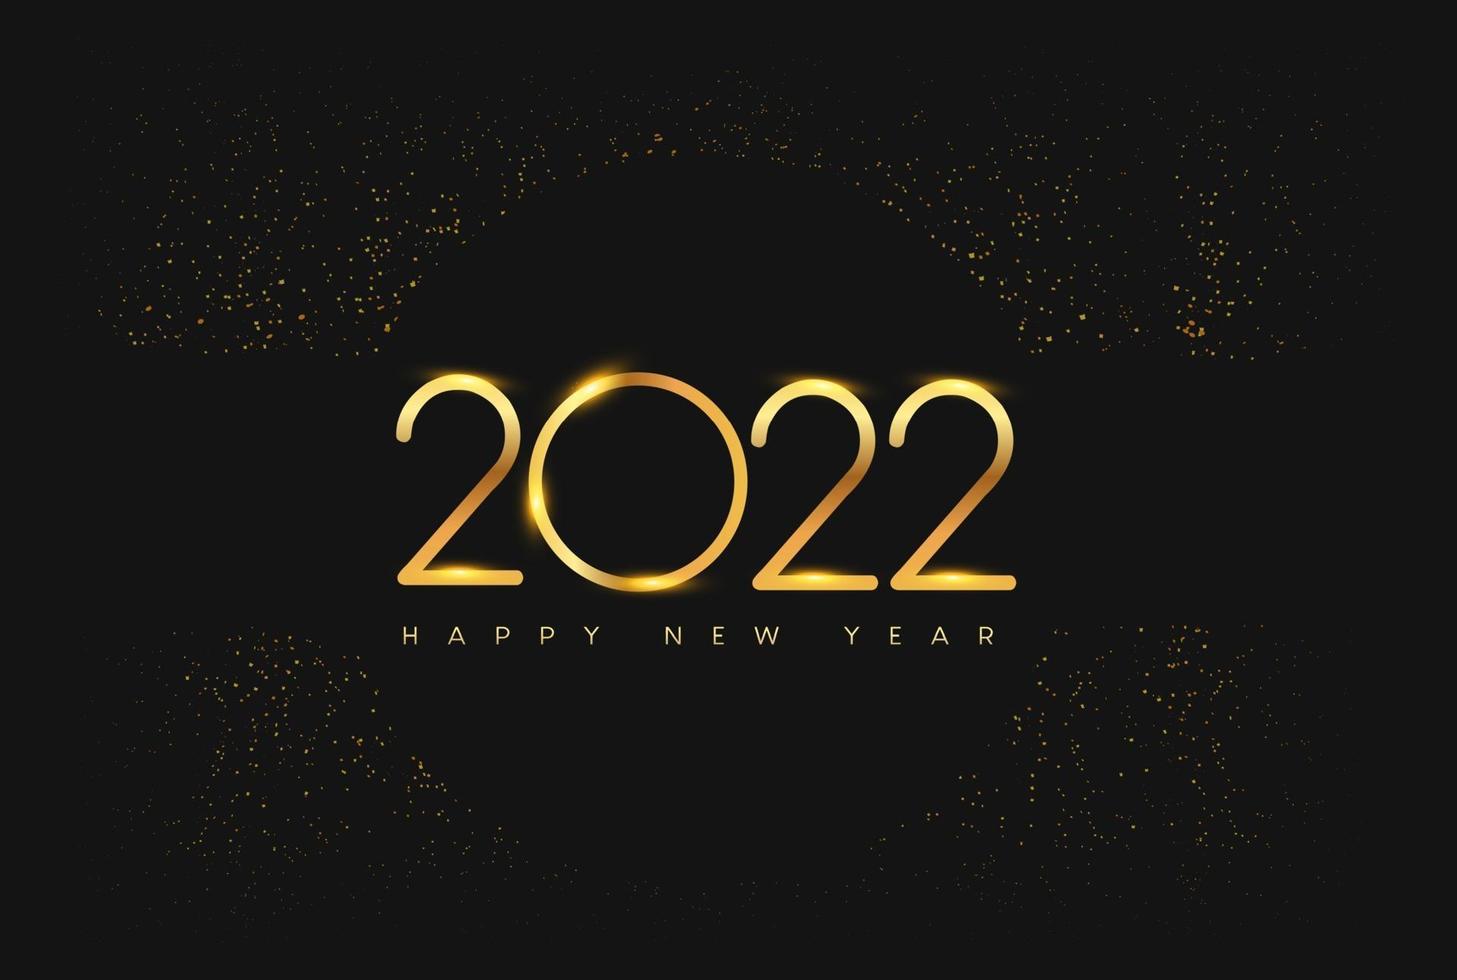 Happy New Year 2022 with glitter isolated on black background vector